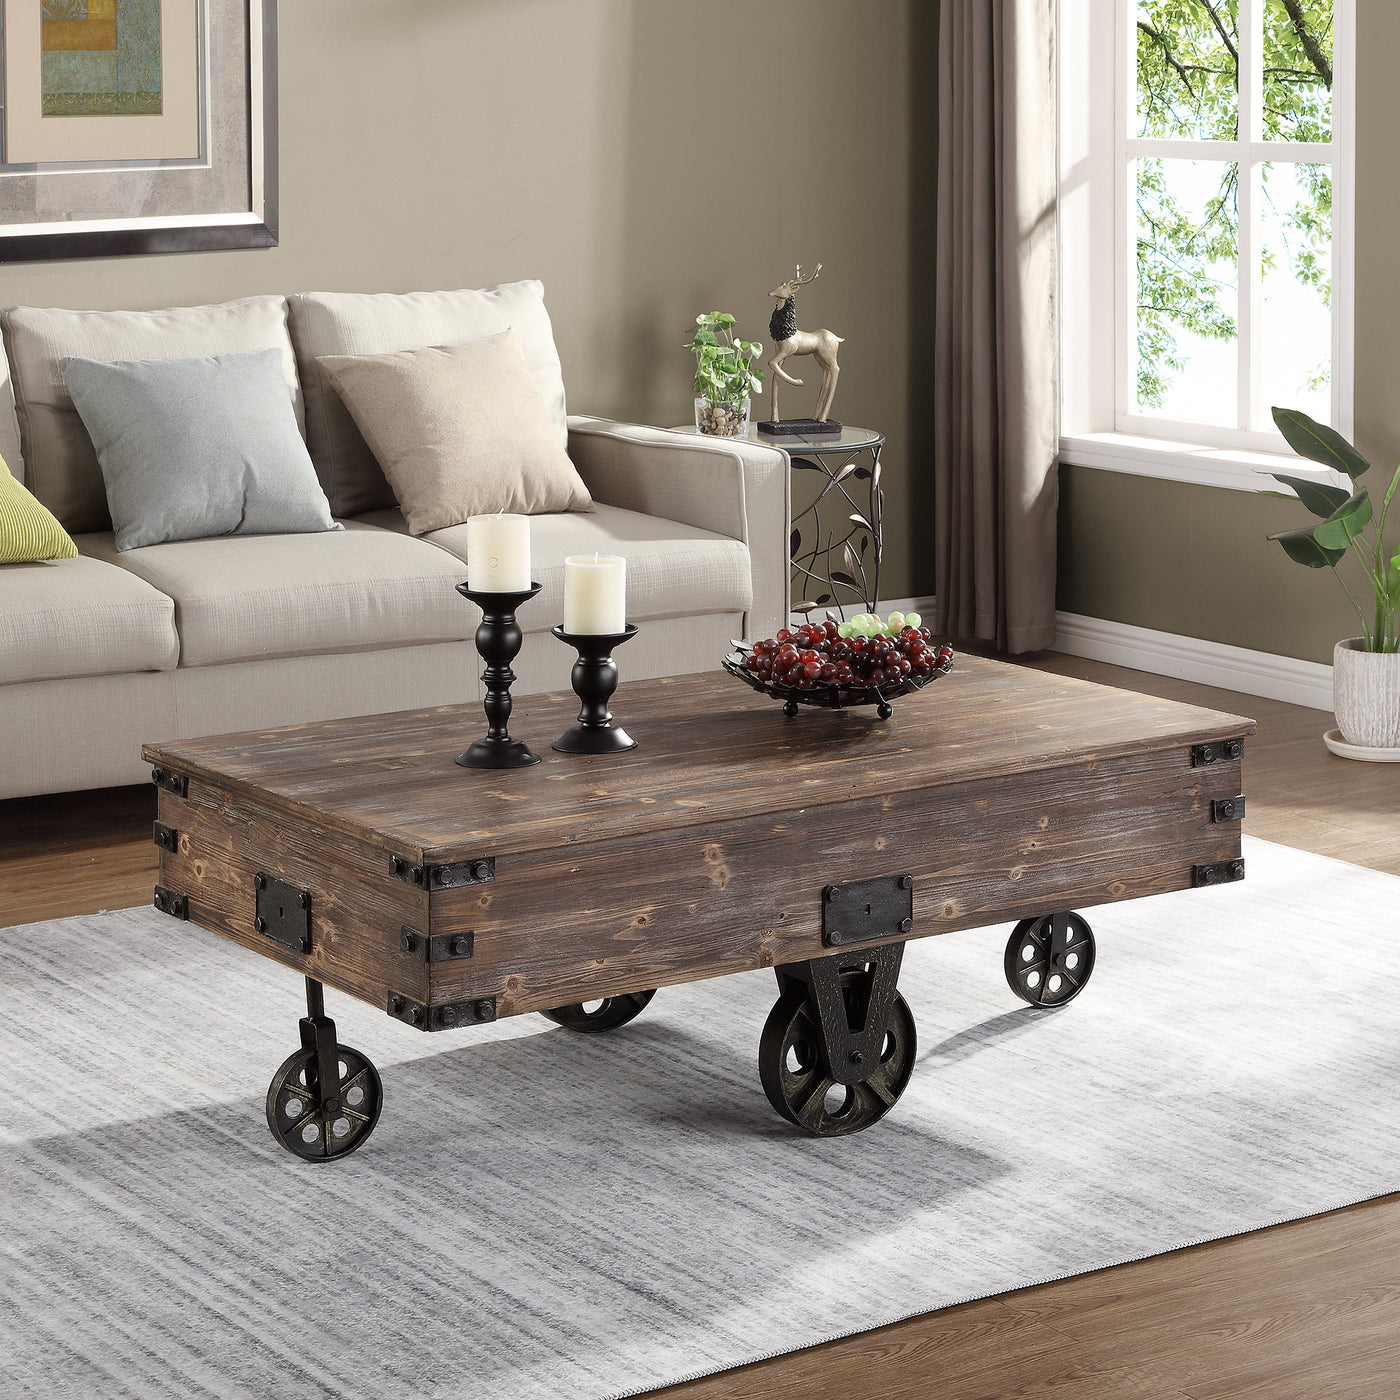 FirsTime & Co. Brown Factory Cart Coffee Table, Farmhouse, Wood, 47.25 x 27.5 x 18 inches